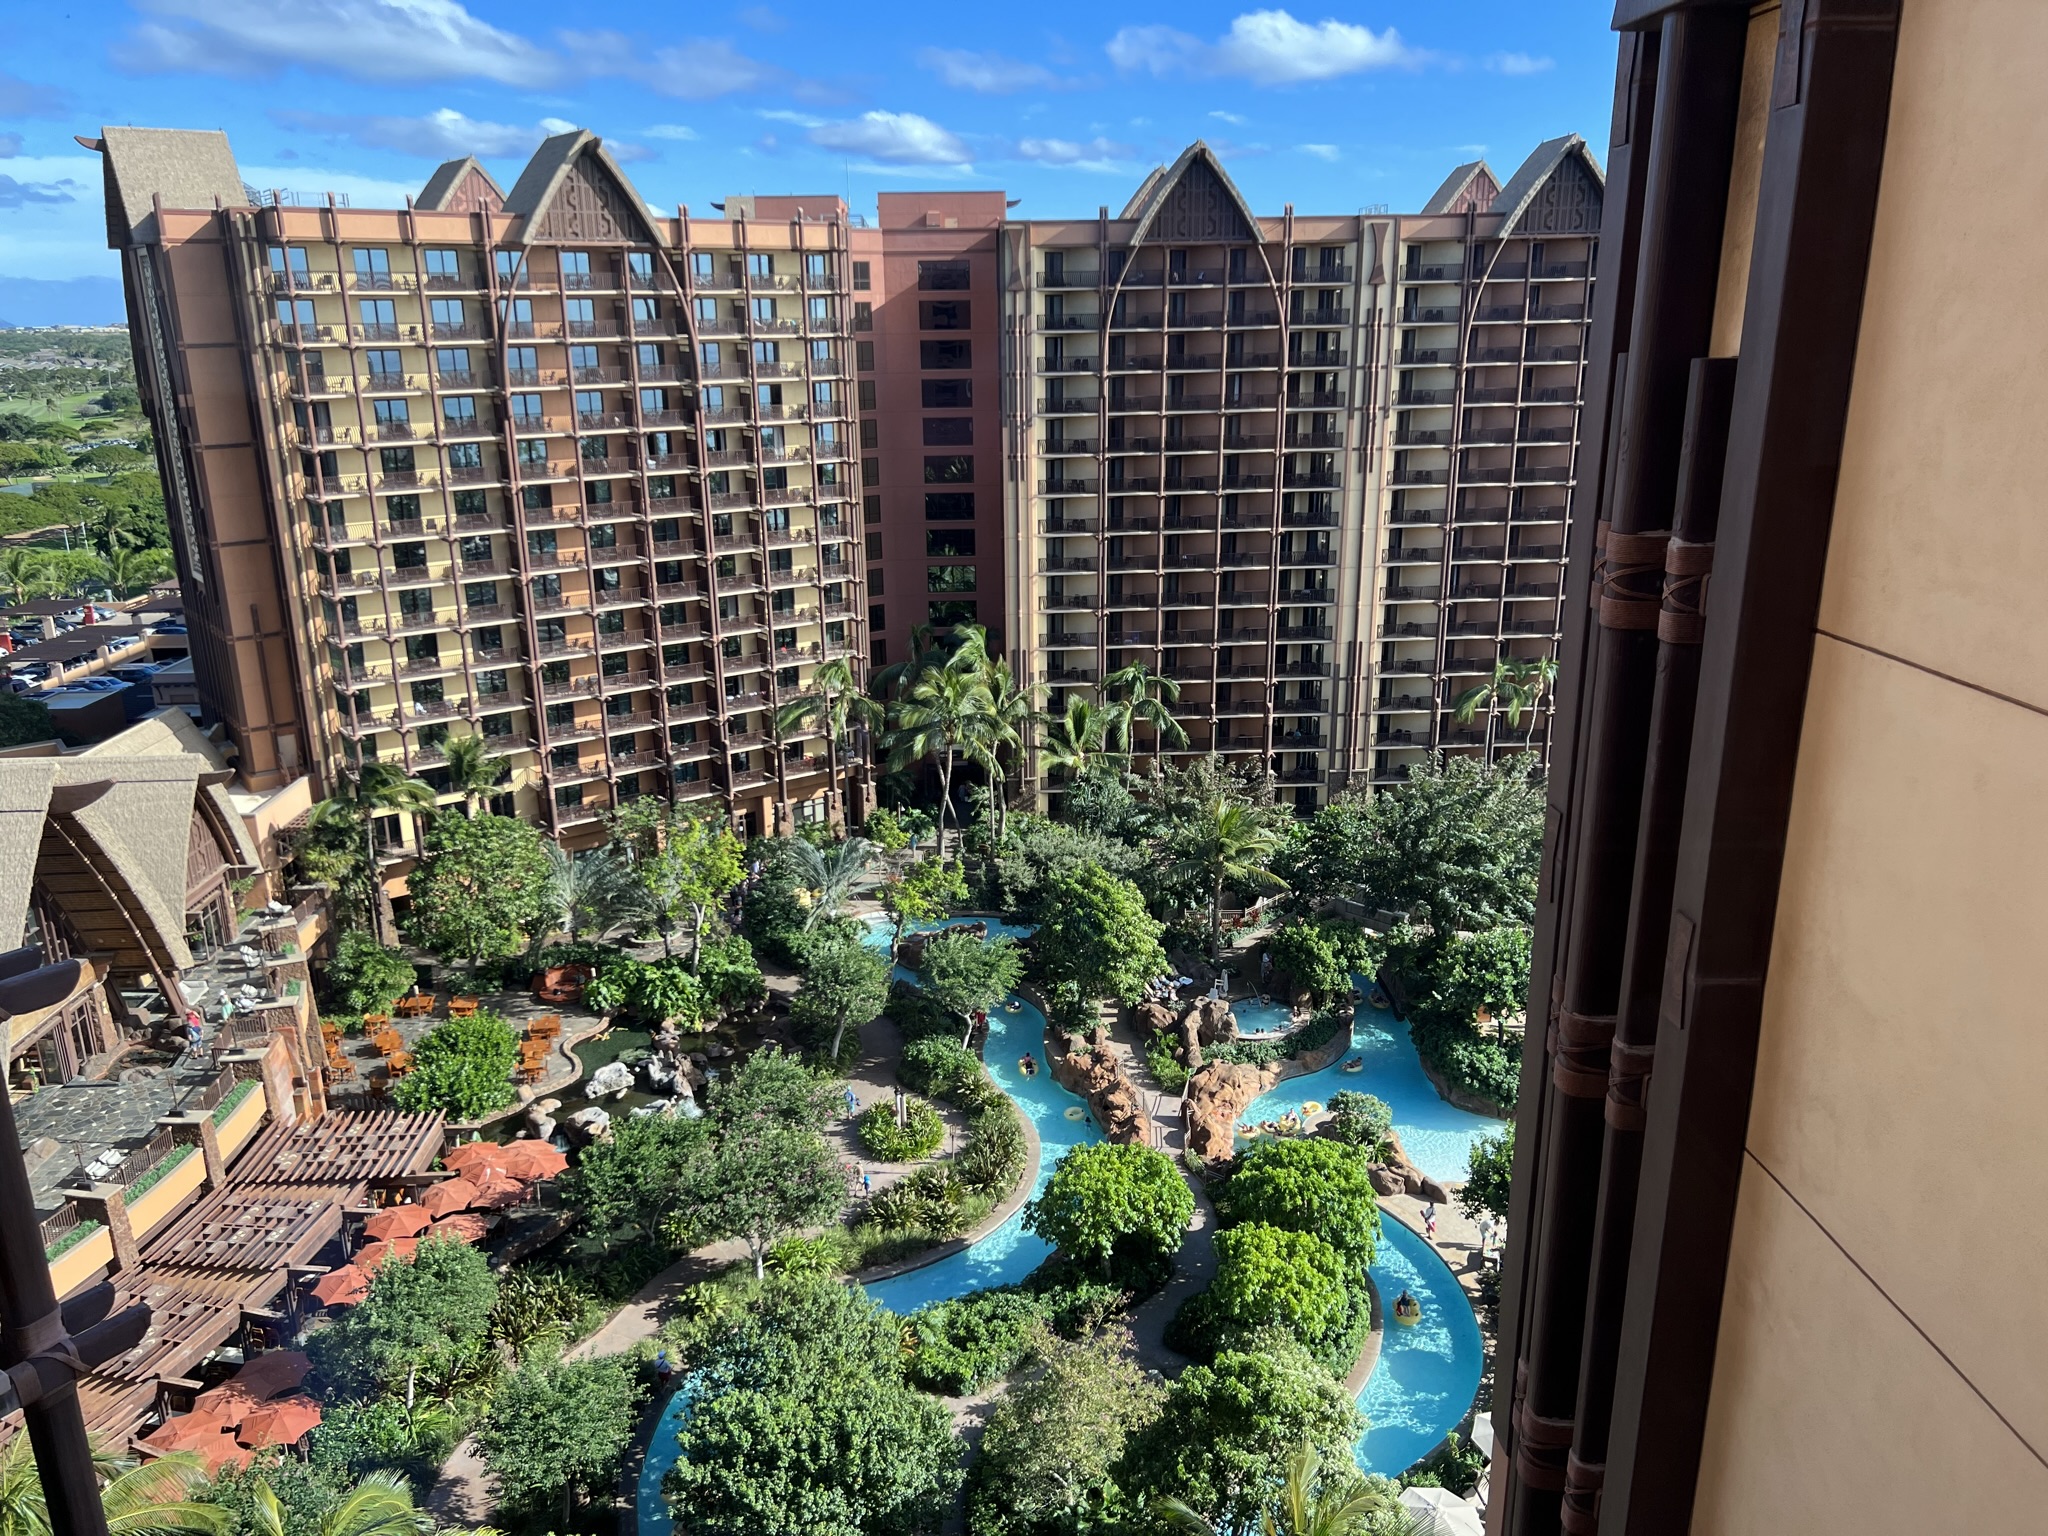 Disney Aulani Hawaii: Explore with an Insider Review